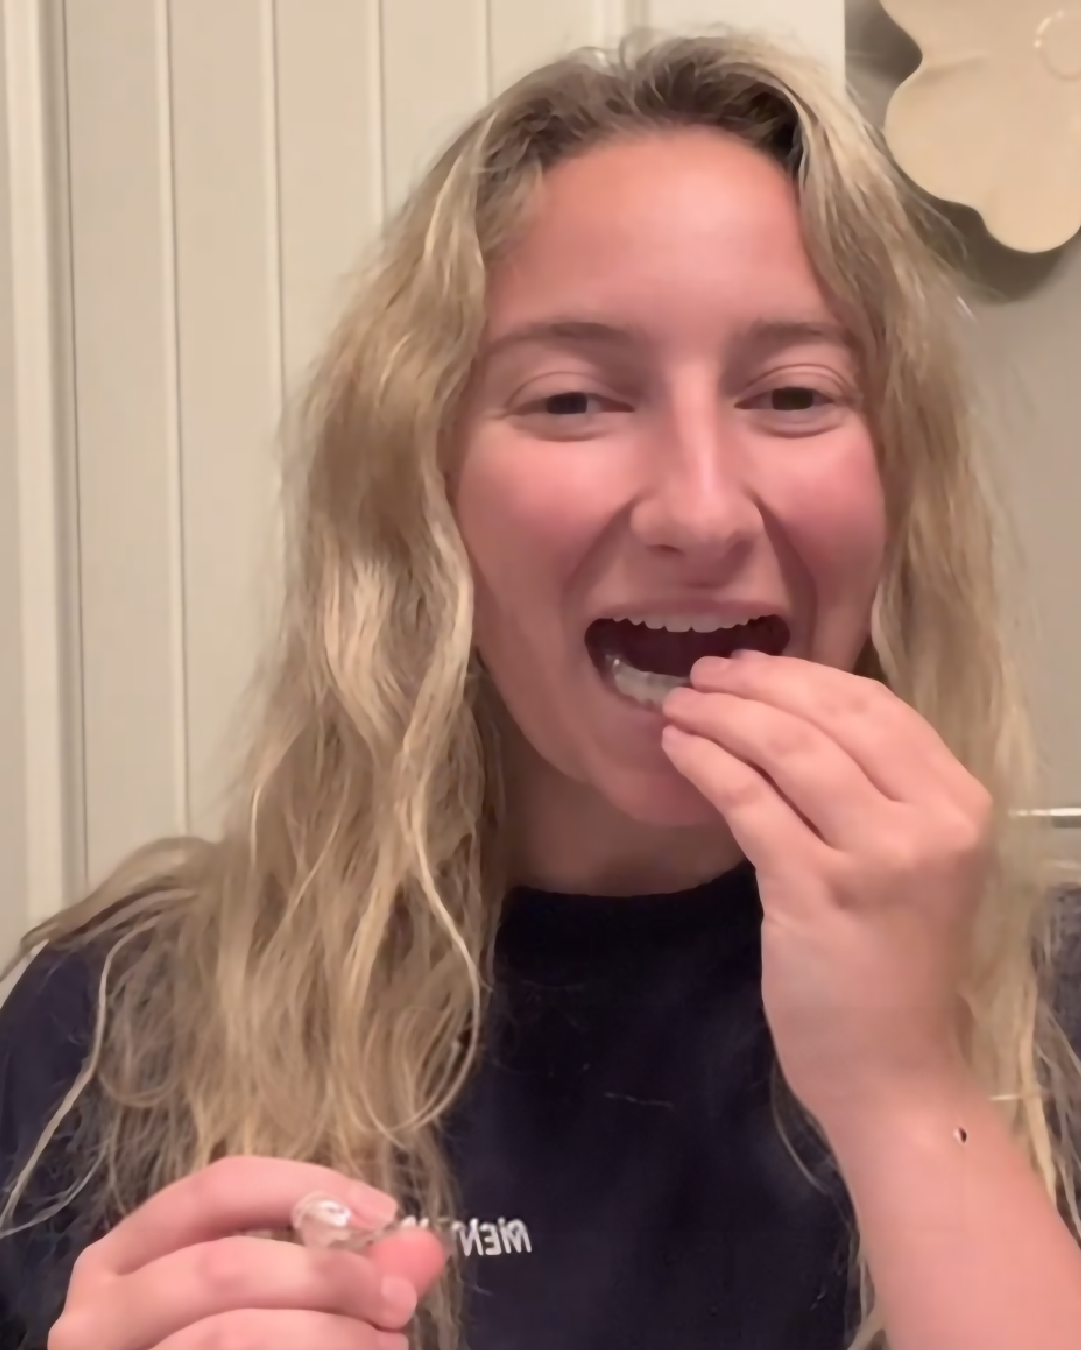 A smiling woman with wavy blonde hair eating a snack.